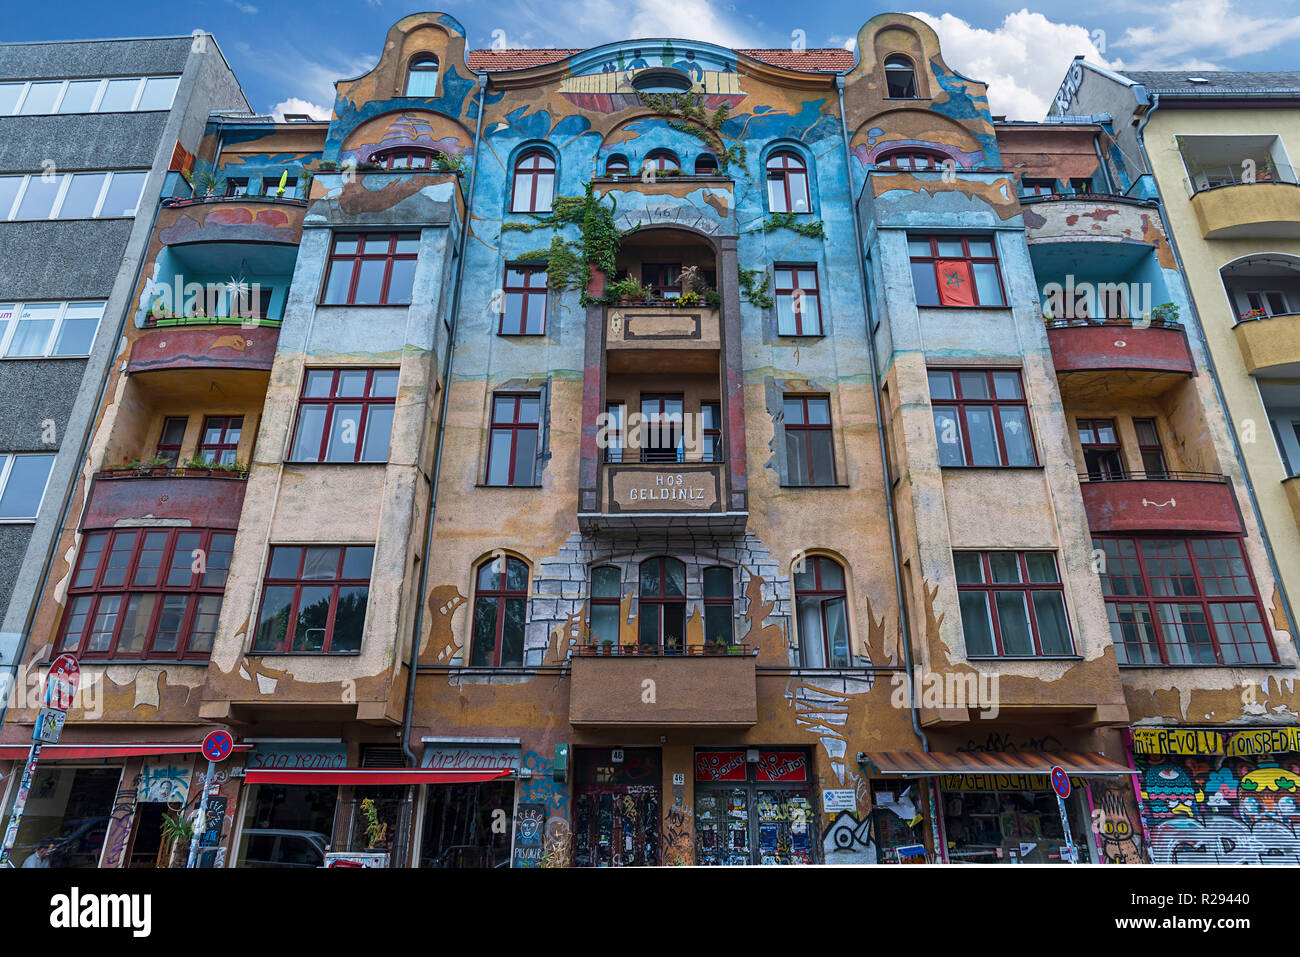 Artistically painted facade of a historic house, Kreuzberg, Berlin, Germany Stock Photo